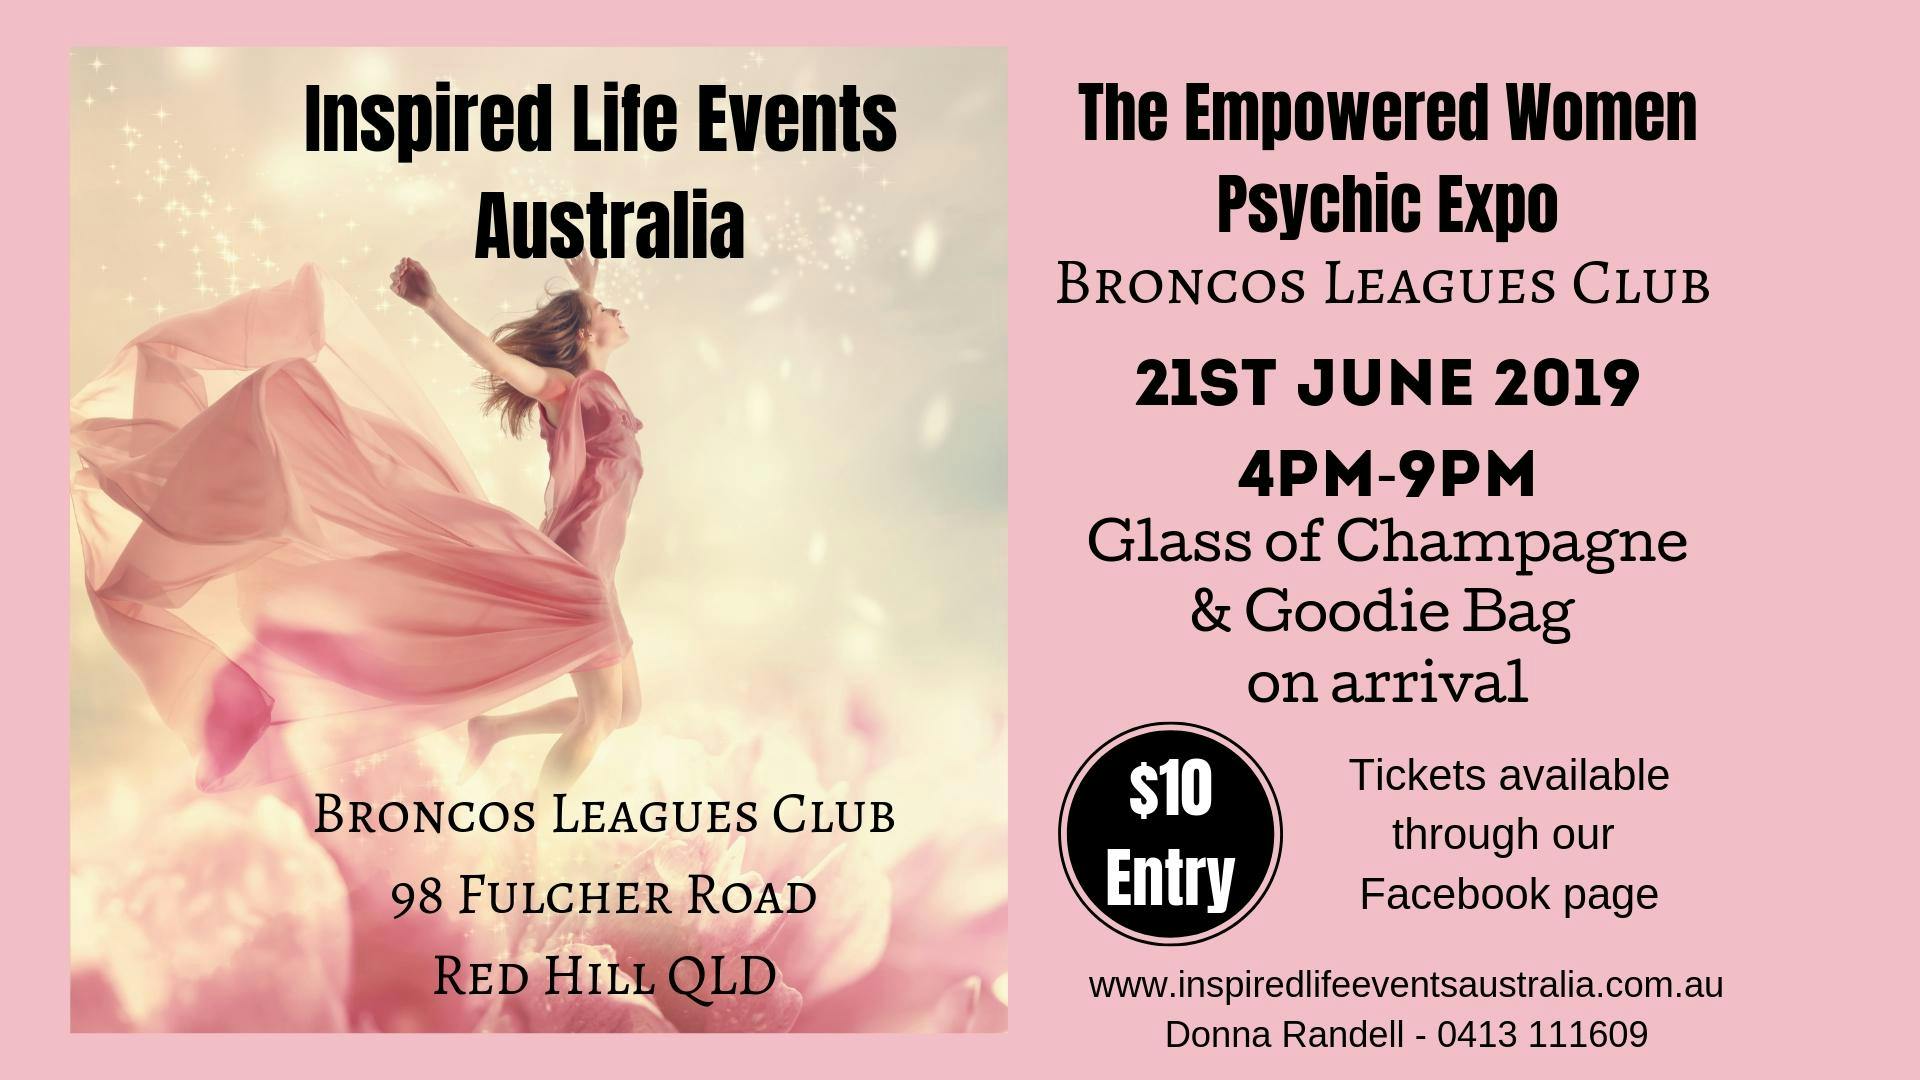 The Empowered Women Psychic Expo